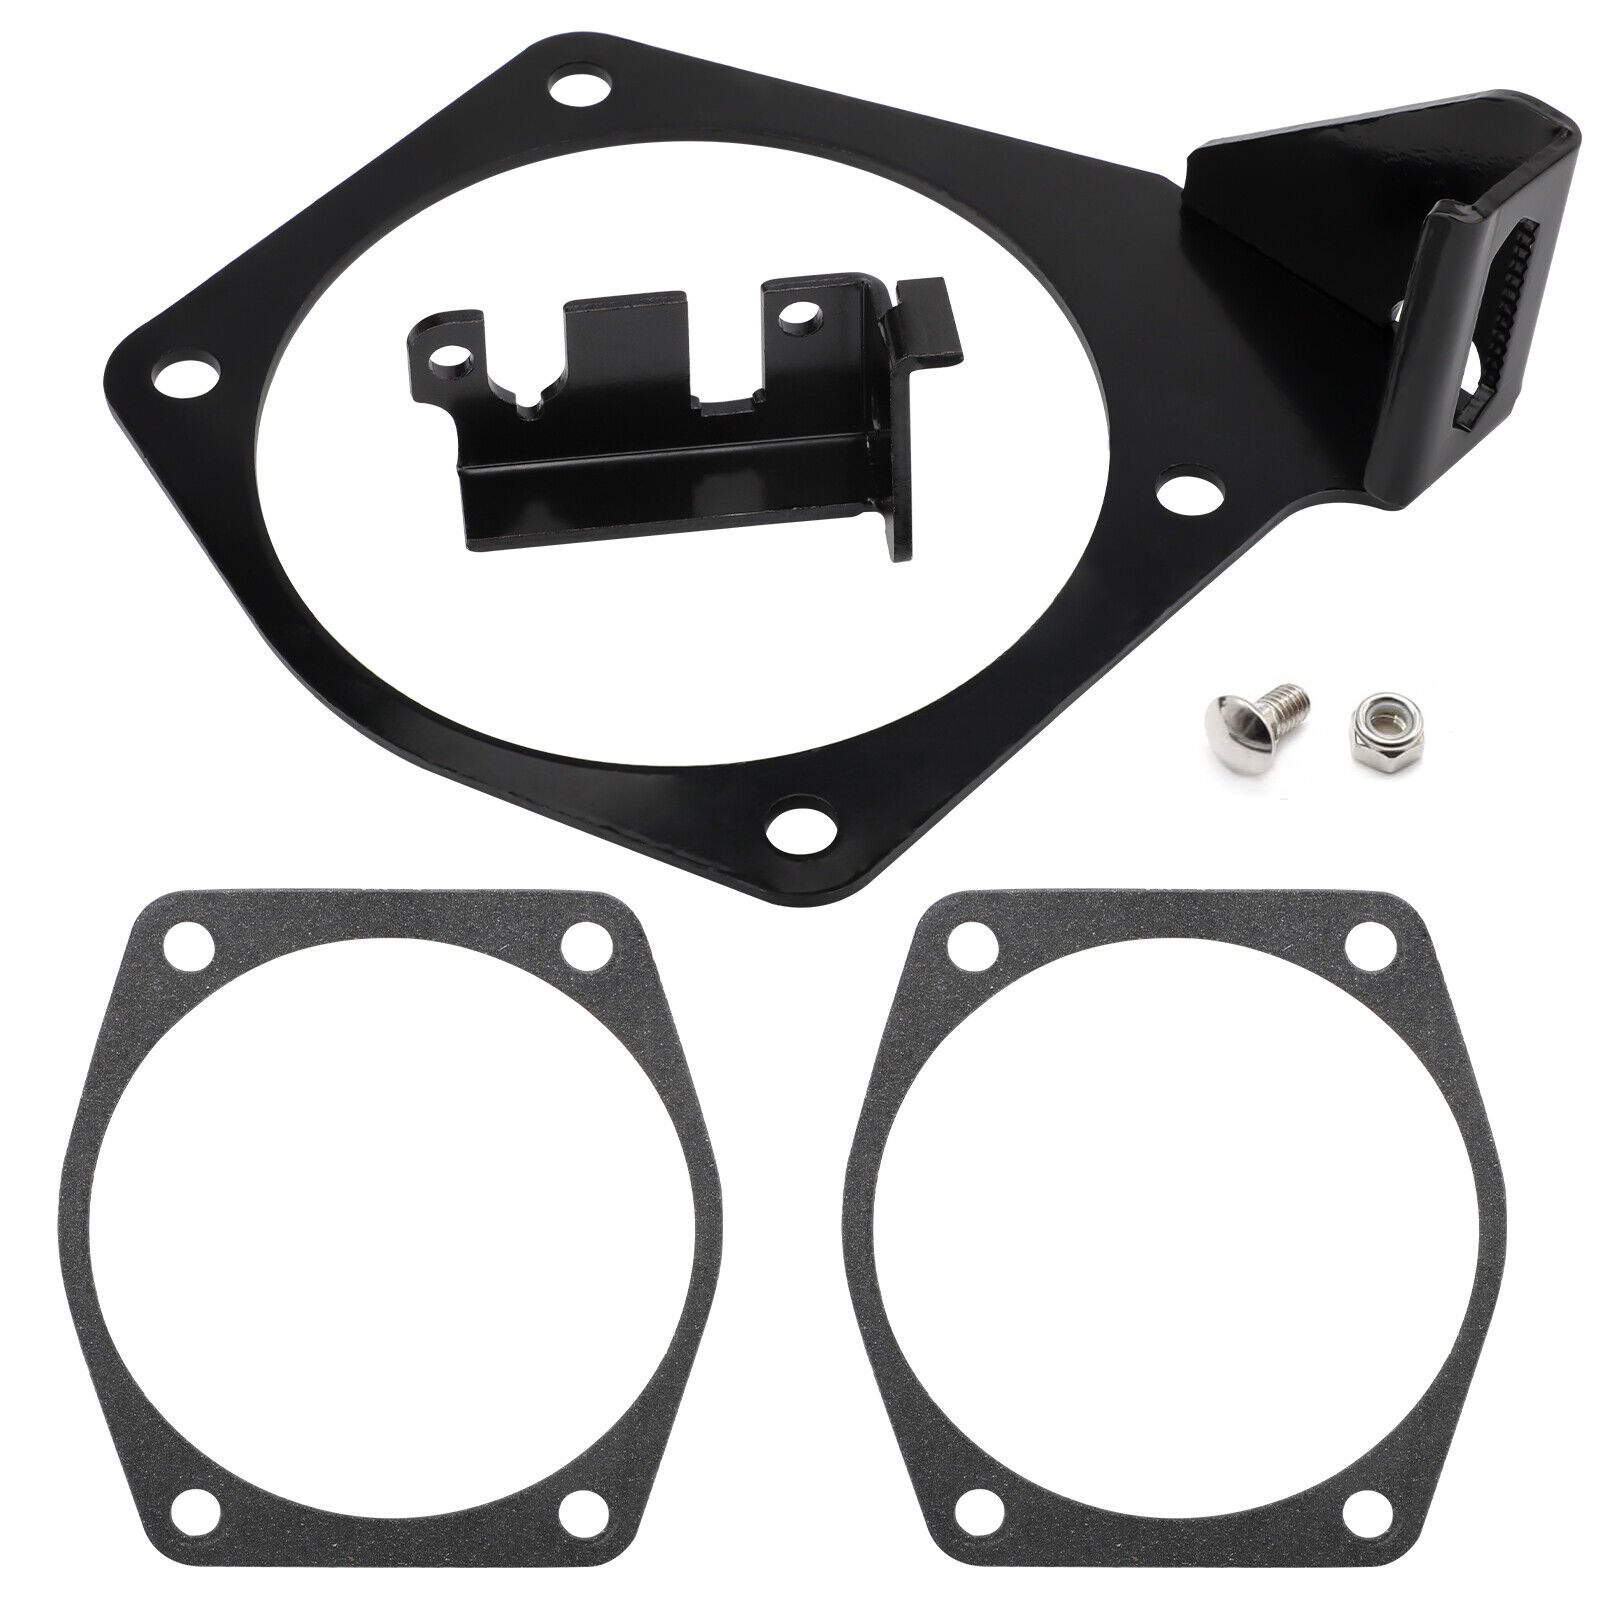 Throttle Body Cable Bracket For LSX LS LS1 LS3 LS6 LS7 4 Bolts Intake 92mm-102mm